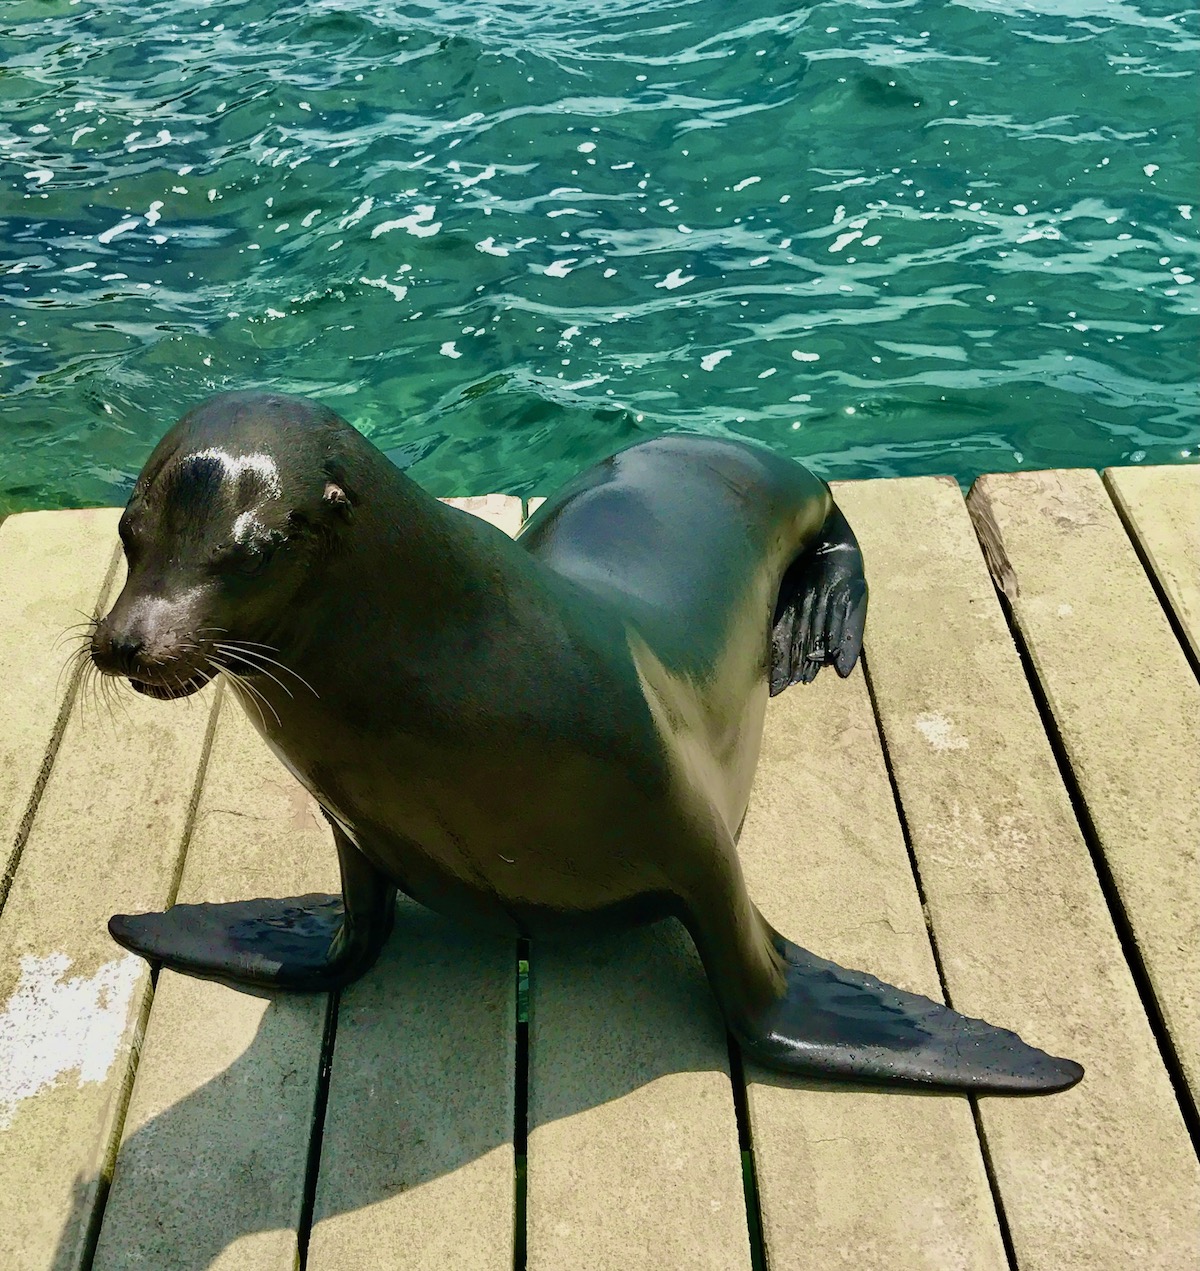 A sea lion stands on a wooden platform in the Galapagos Islands 